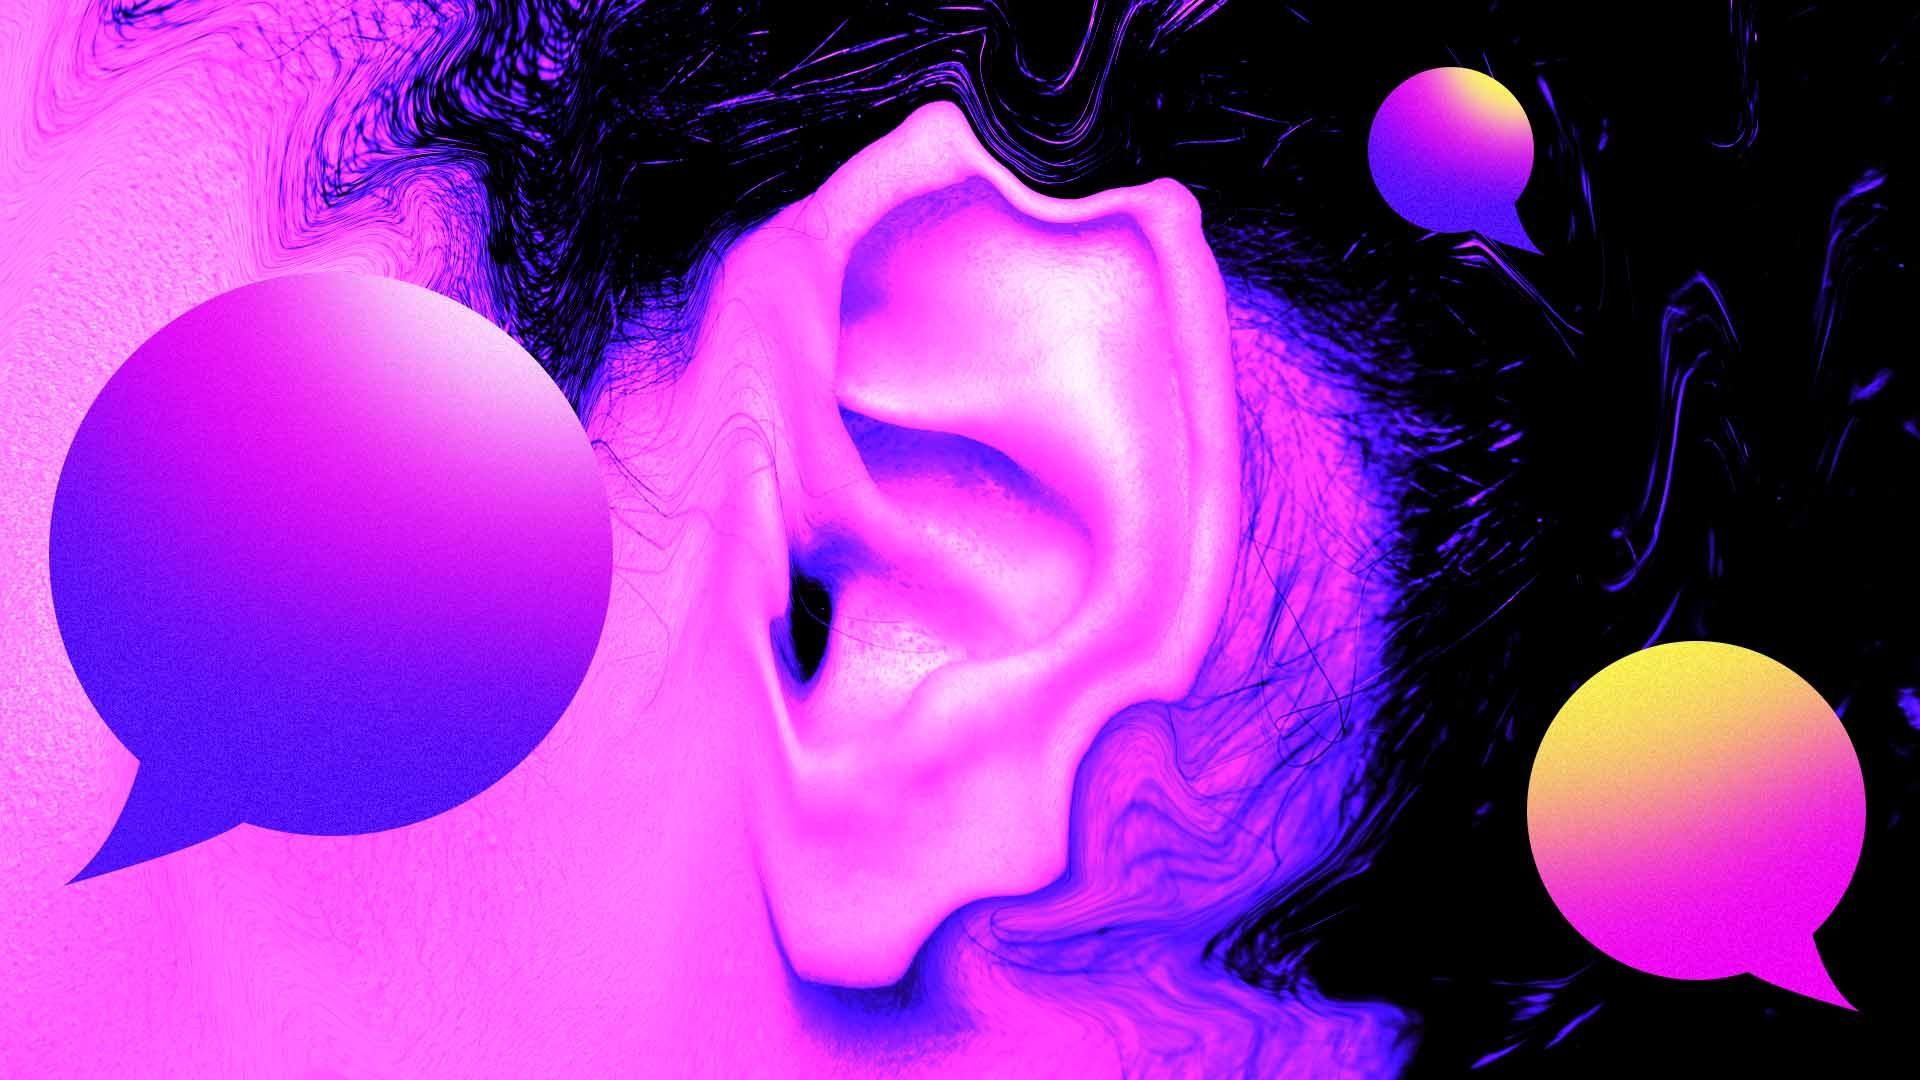 Illustration of a distorted ear with speech bubbles surrounding it